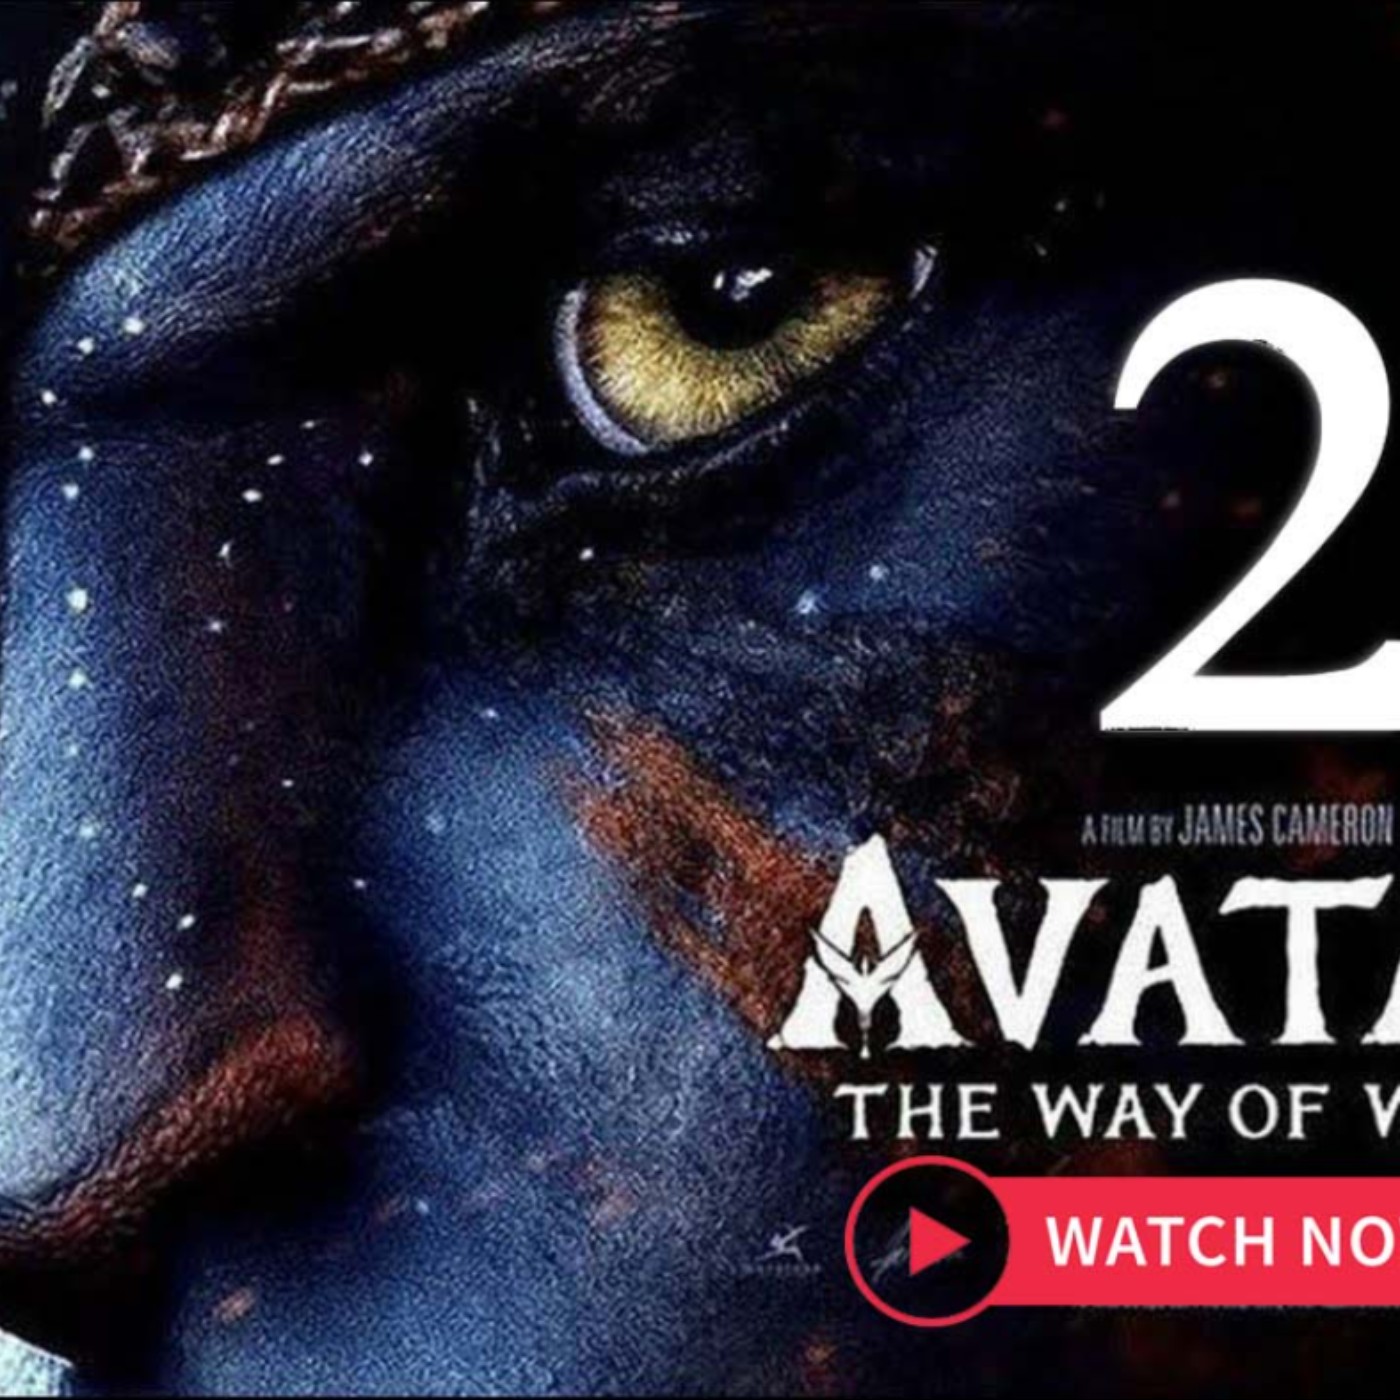 avatar 2 full movie free download in english